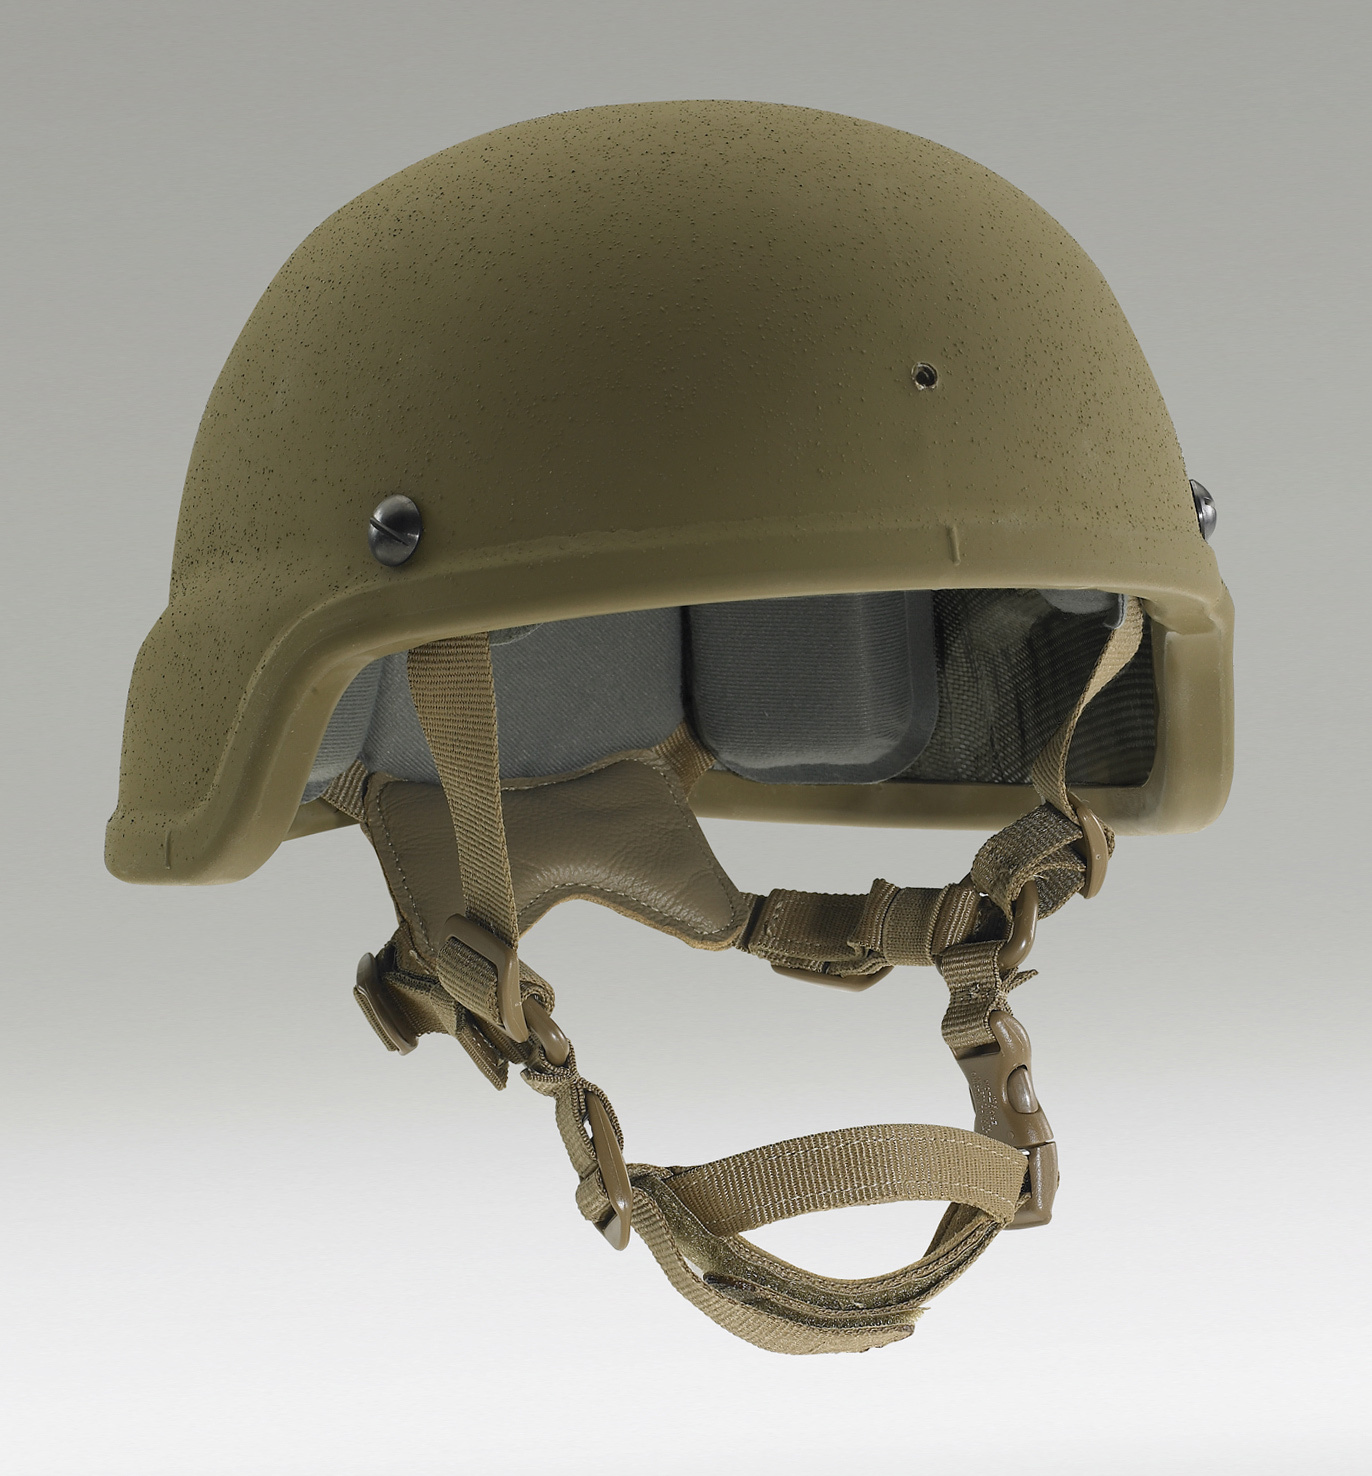 Popular Science Names 3M's Enhanced Combat Helmets as One of the ...